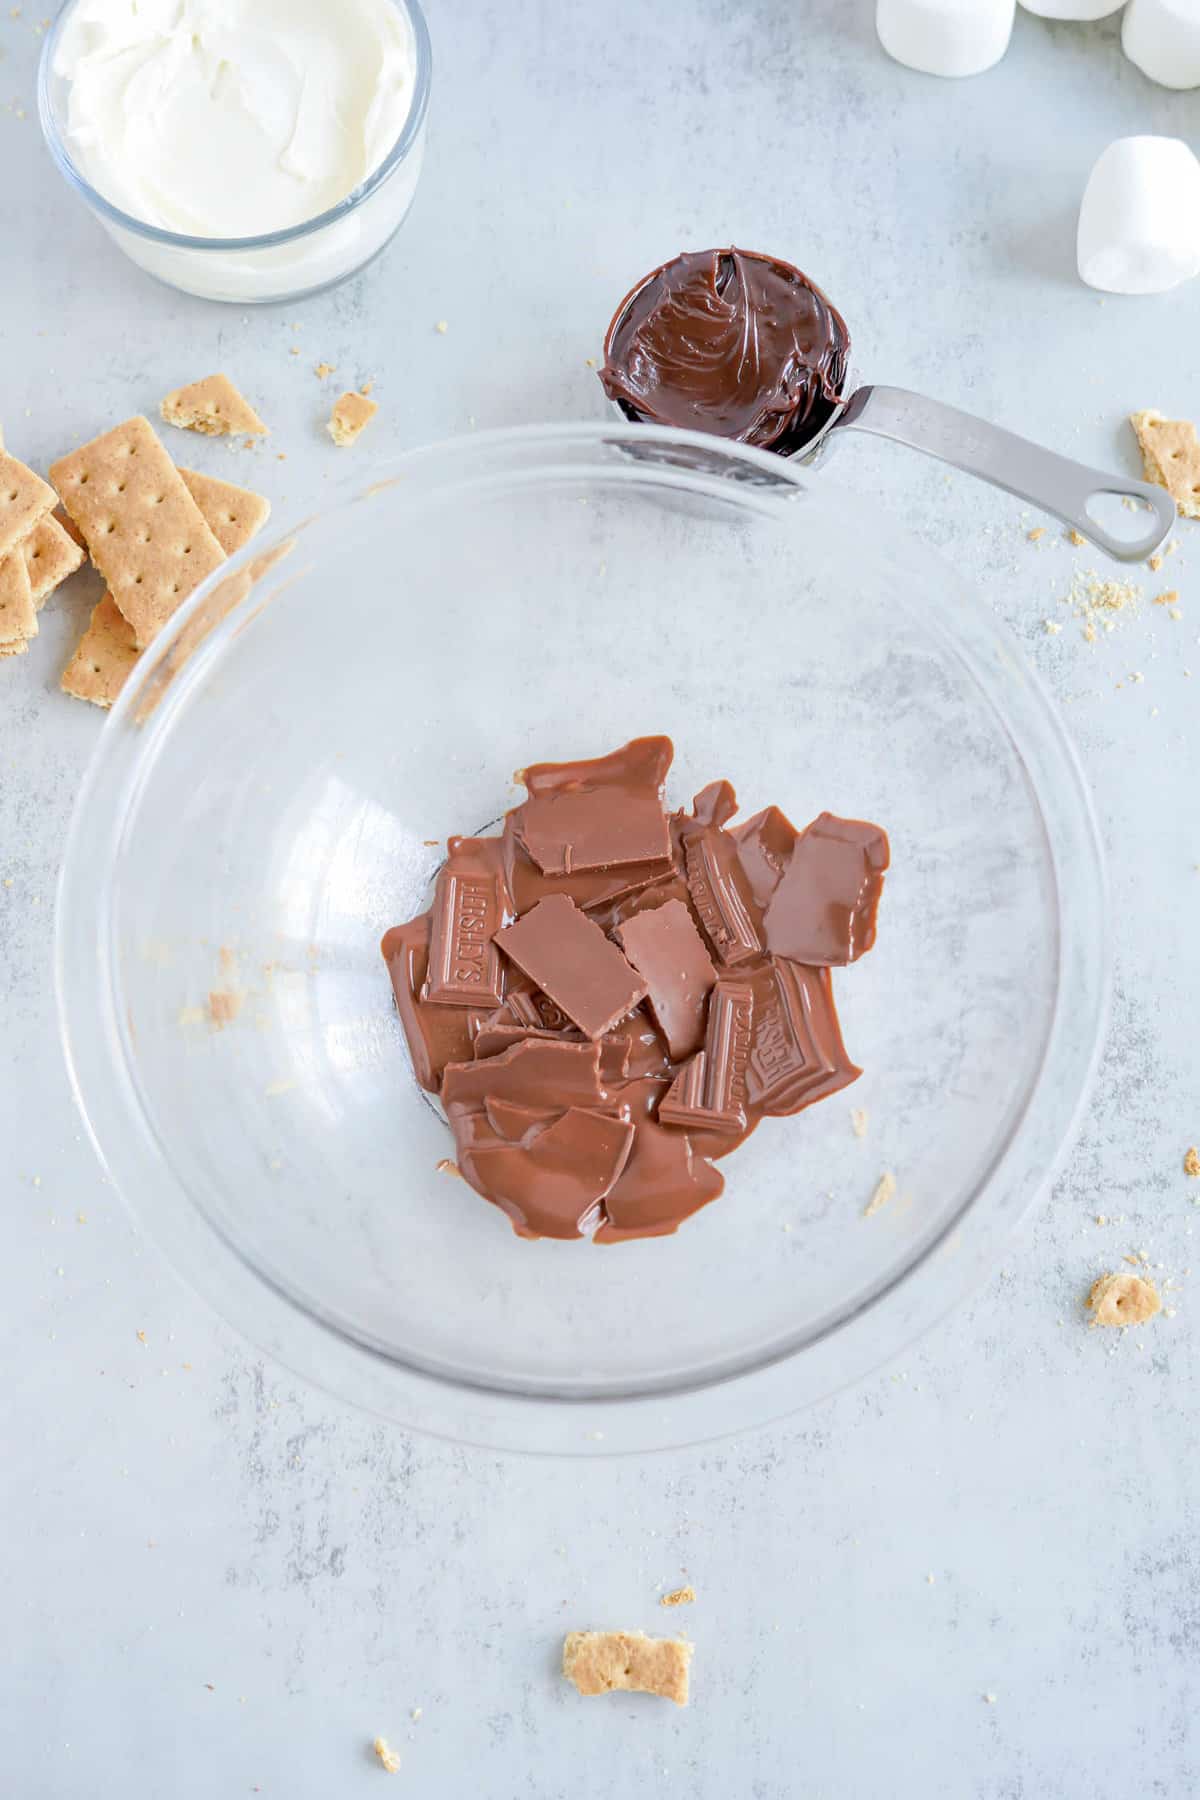 Slightly Melted Chocolate Pieces in Glass Bowl for S mores Dip